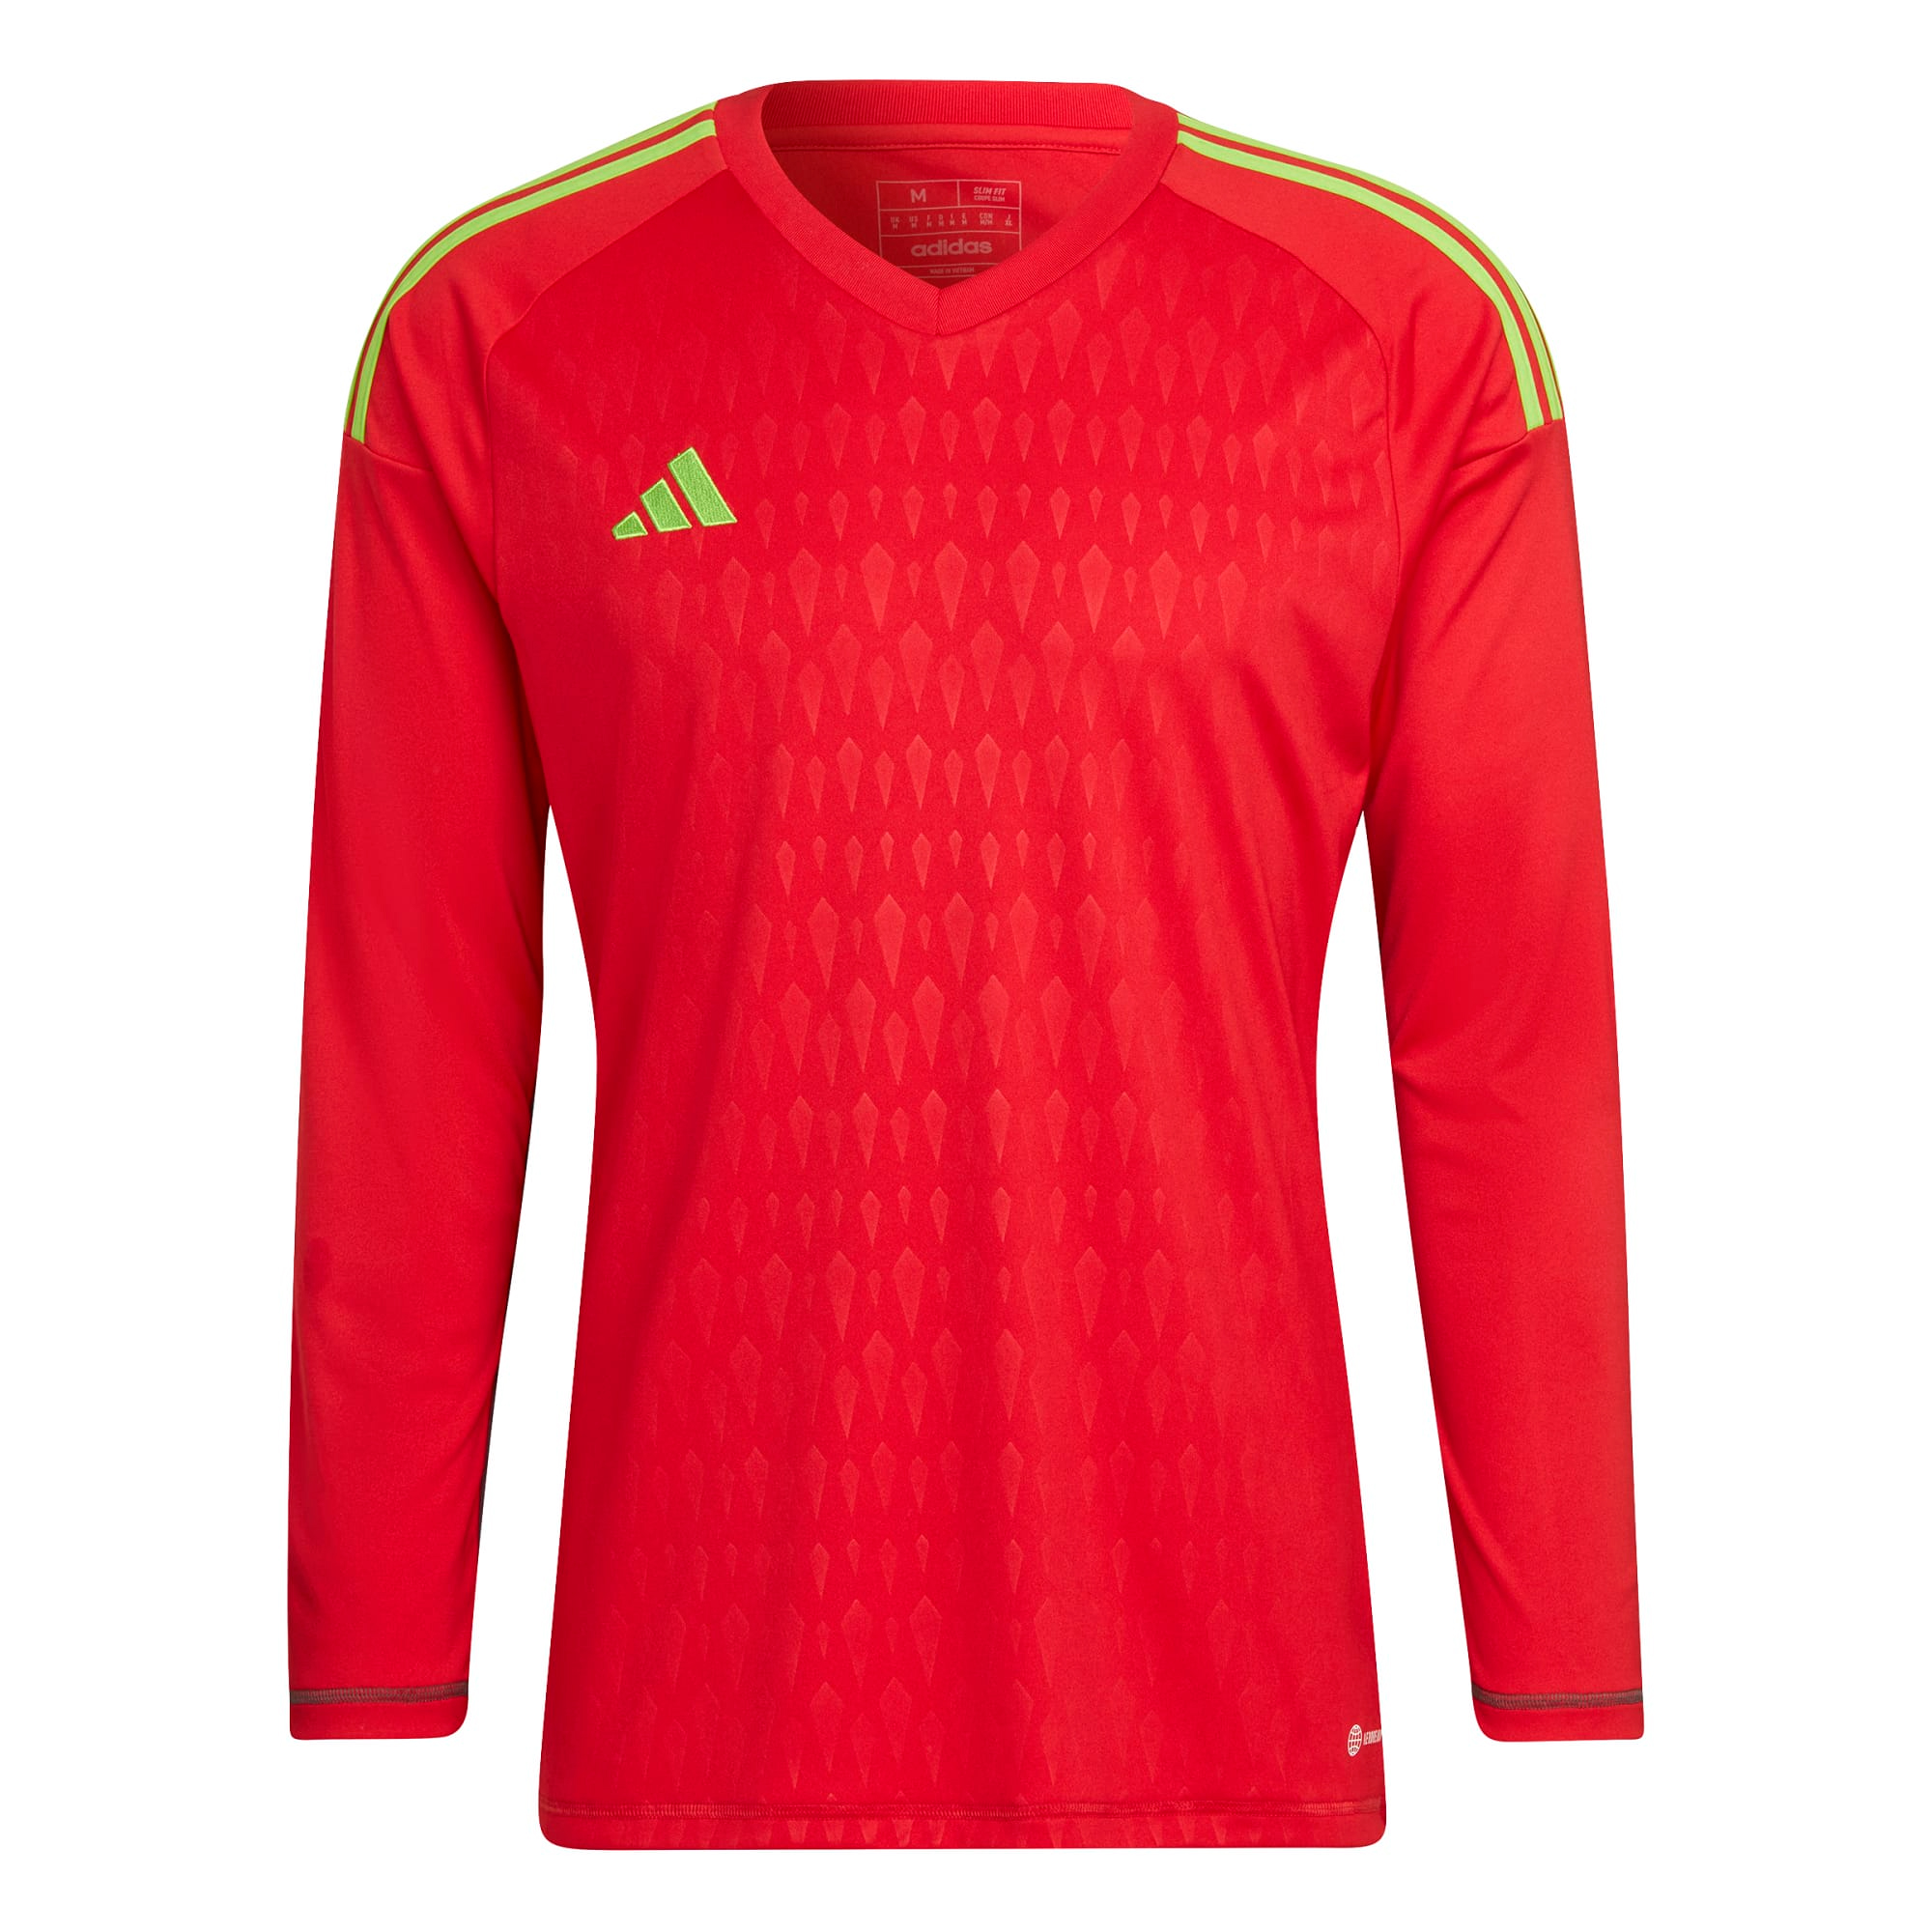 ADIDAS T23 COMPETITION GK JERSEY LS TEAM CORE RED